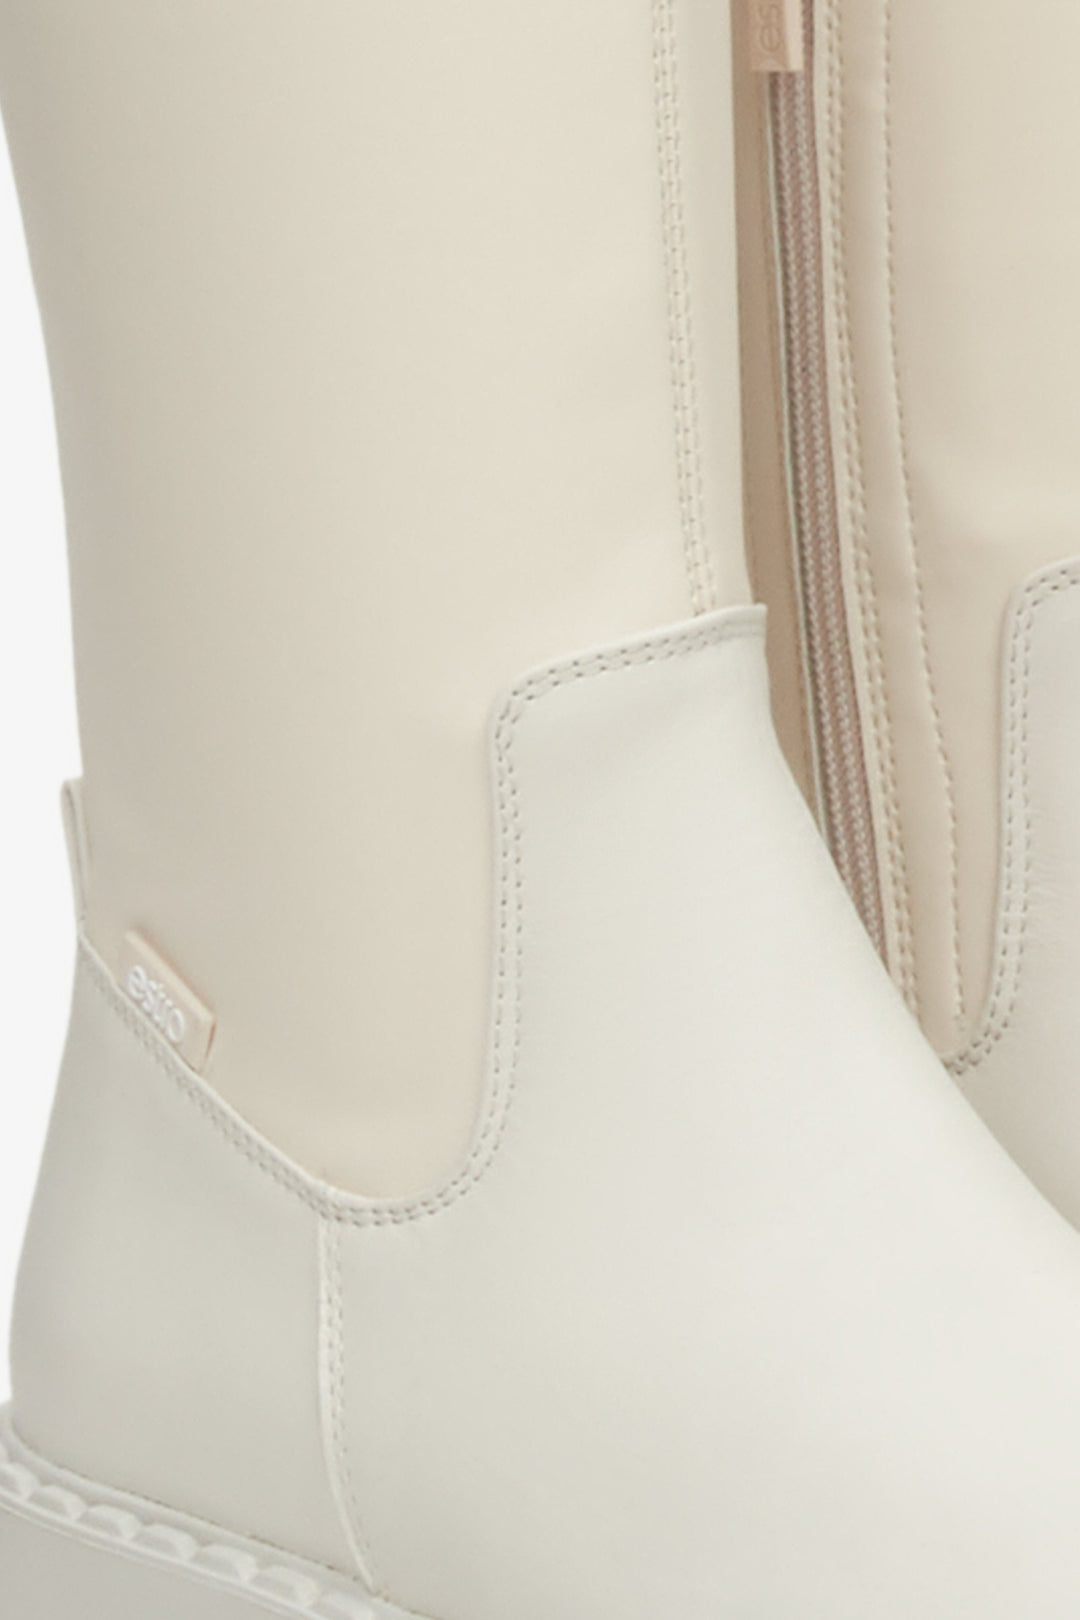 Women's high beige boots made of soft leather, reaching above the knee - close-up on the detail.